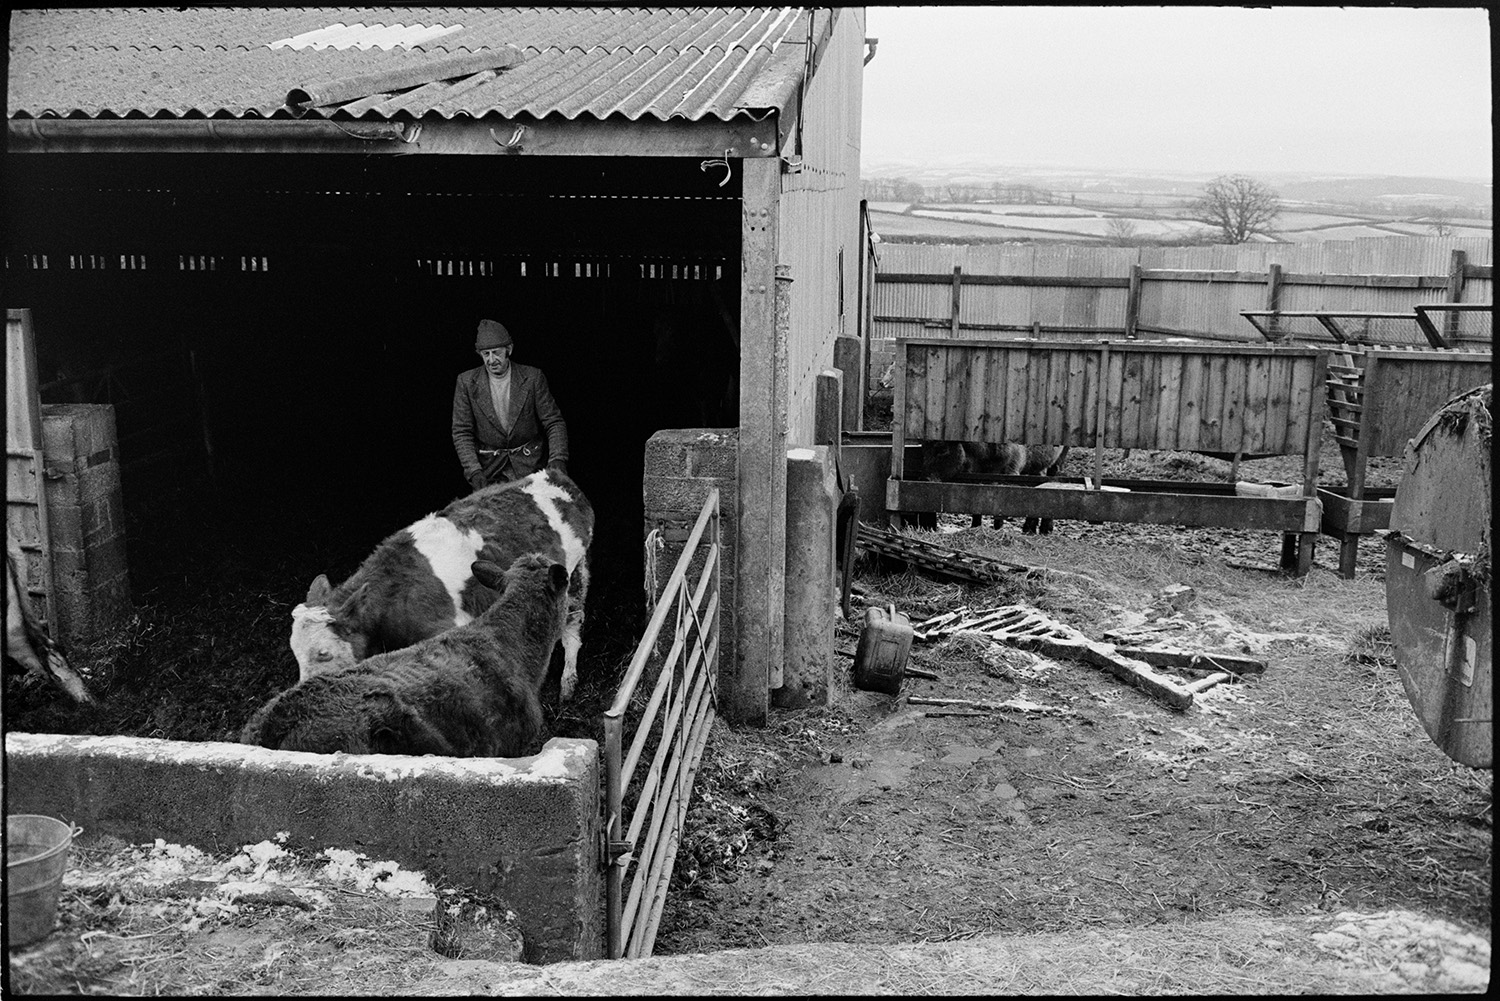 Farmer filling muck spreader with wheelbarrow in farmyard.
[A farmer with two cattle in a barn in a farmyard at Ingleigh Green. Fields, trees and snowy hills are visible in the distance.]